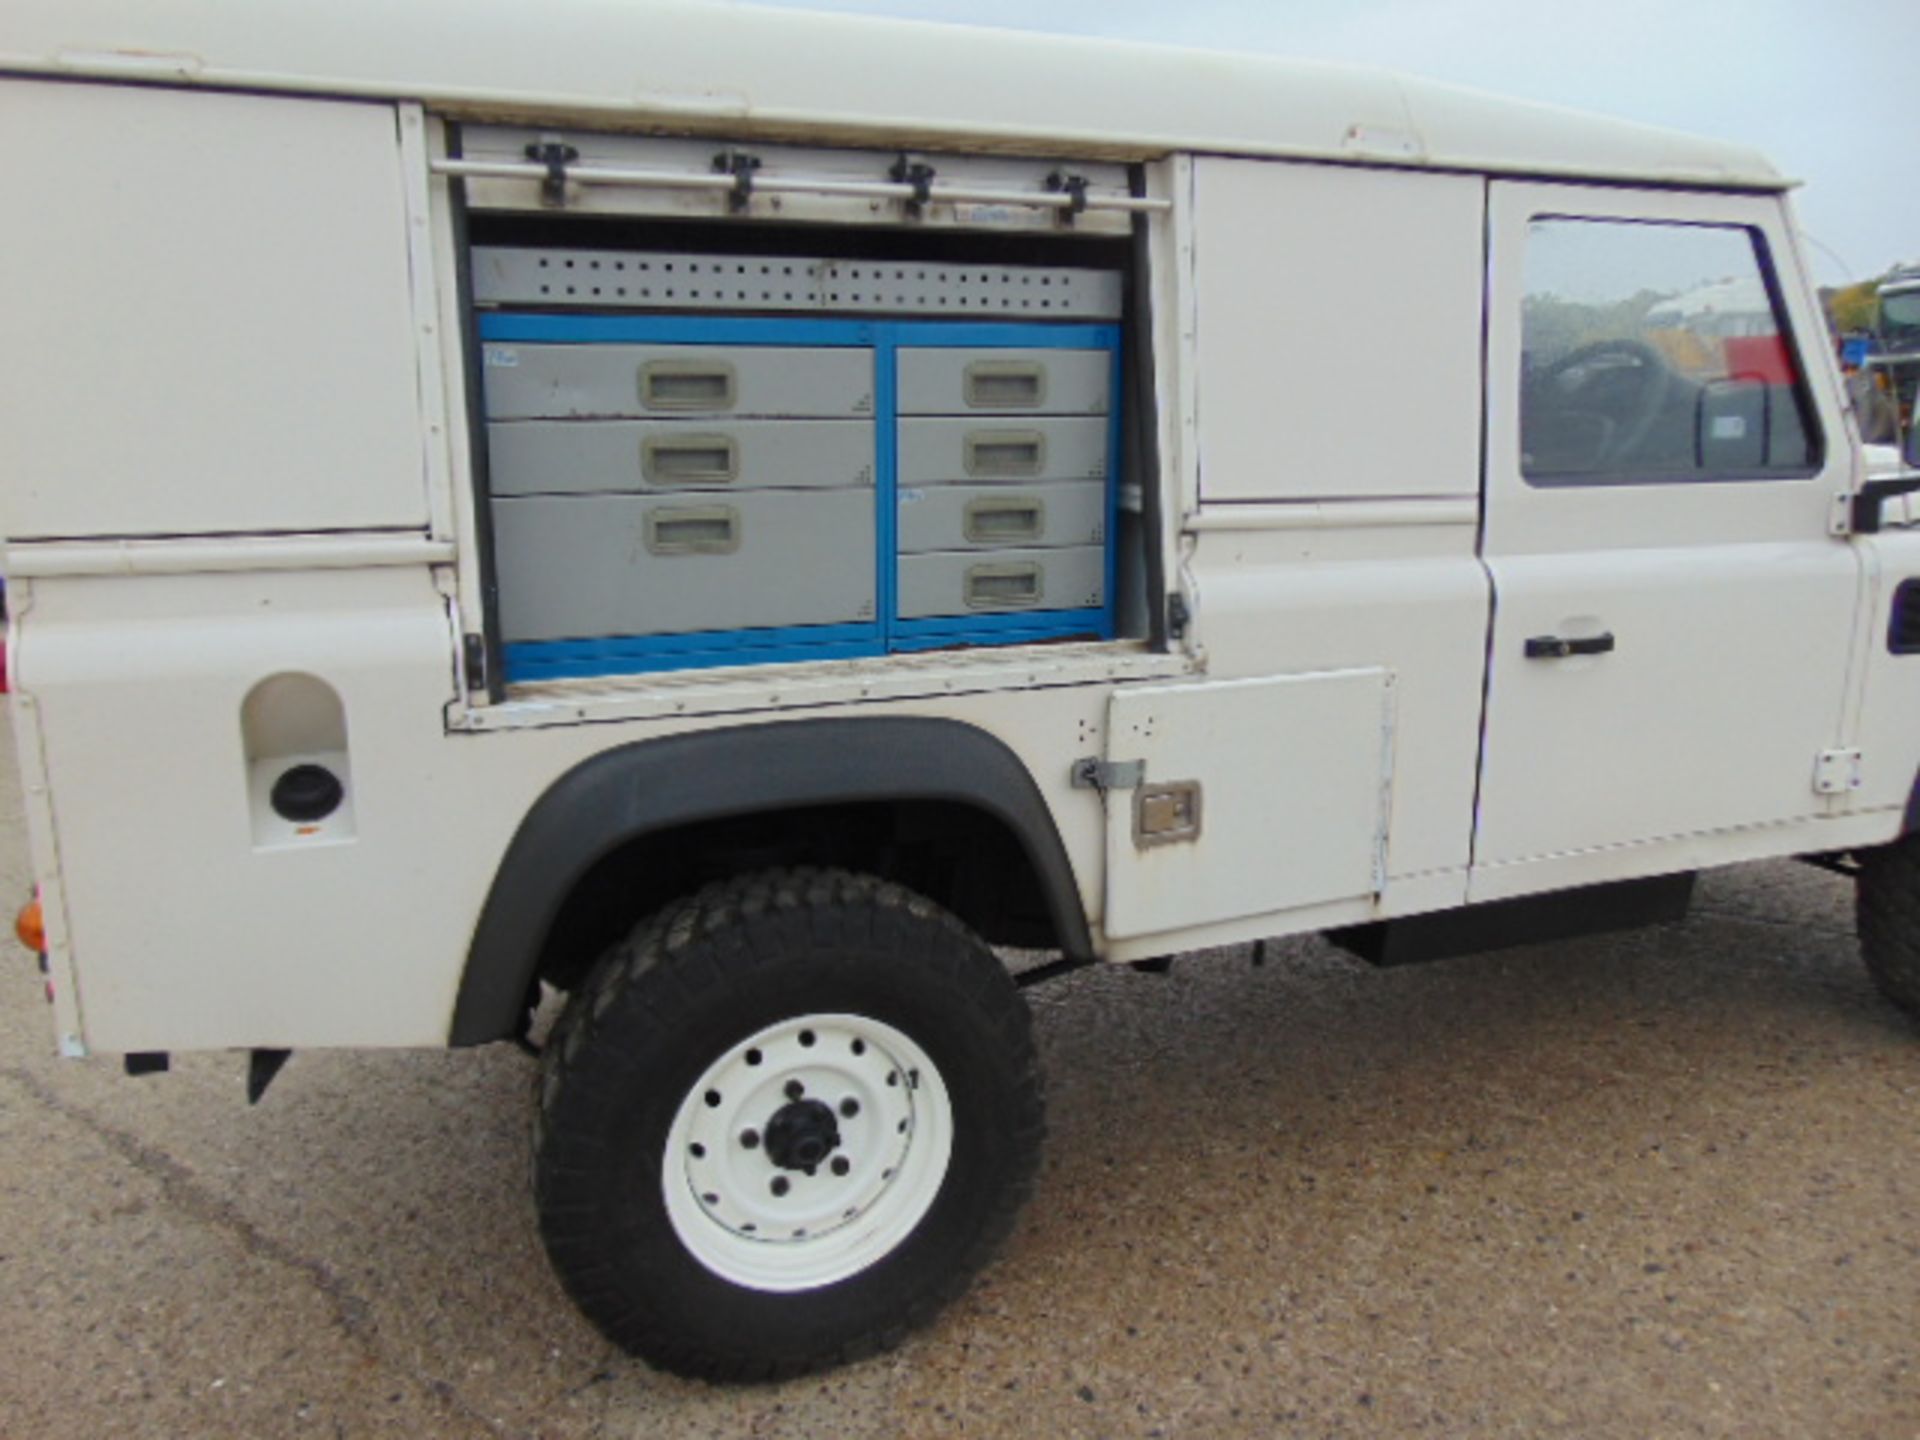 Land Rover Defender 110 Puma Hardtop 4x4 Special Utility (Mobile Workshop) complete with Winch - Image 19 of 23